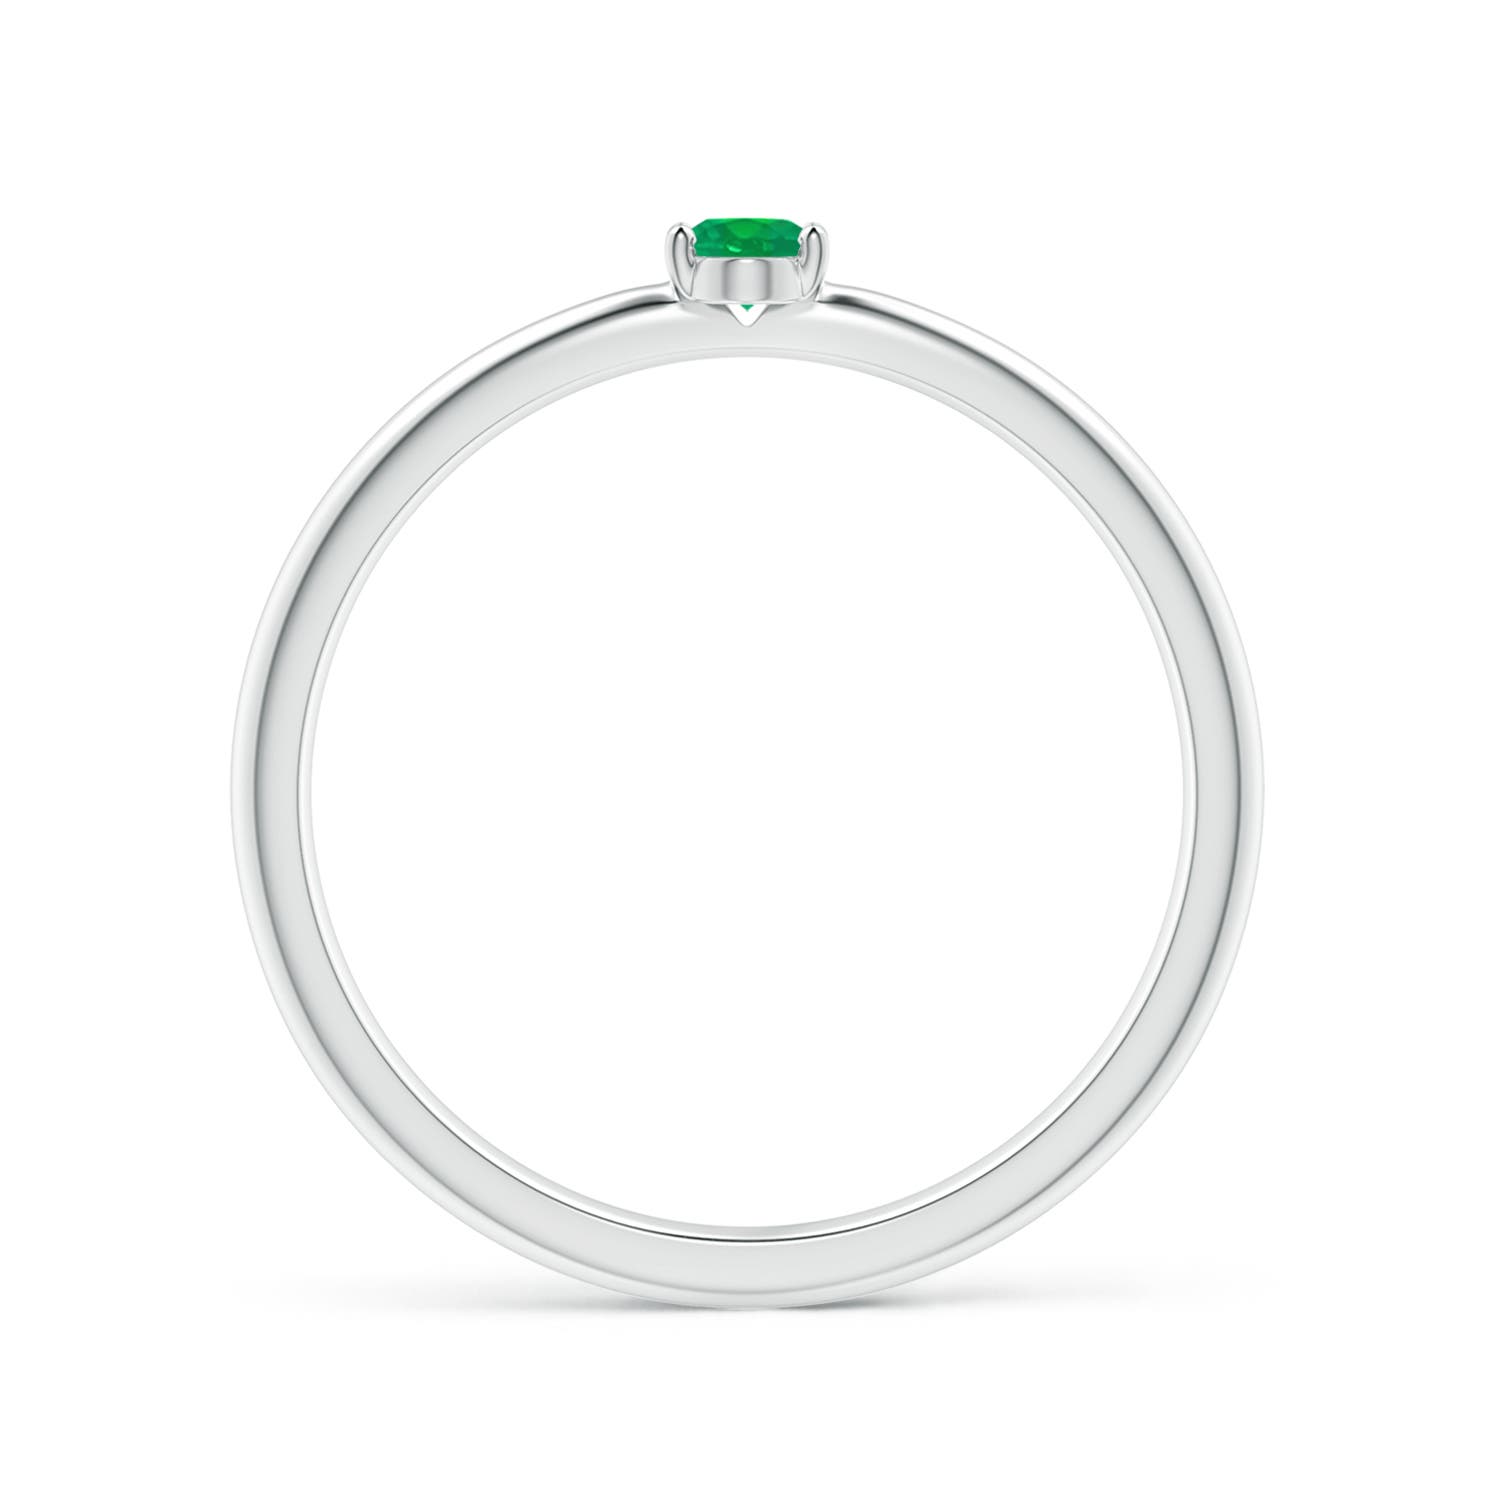 AA - Emerald / 0.12 CT / 14 KT White Gold